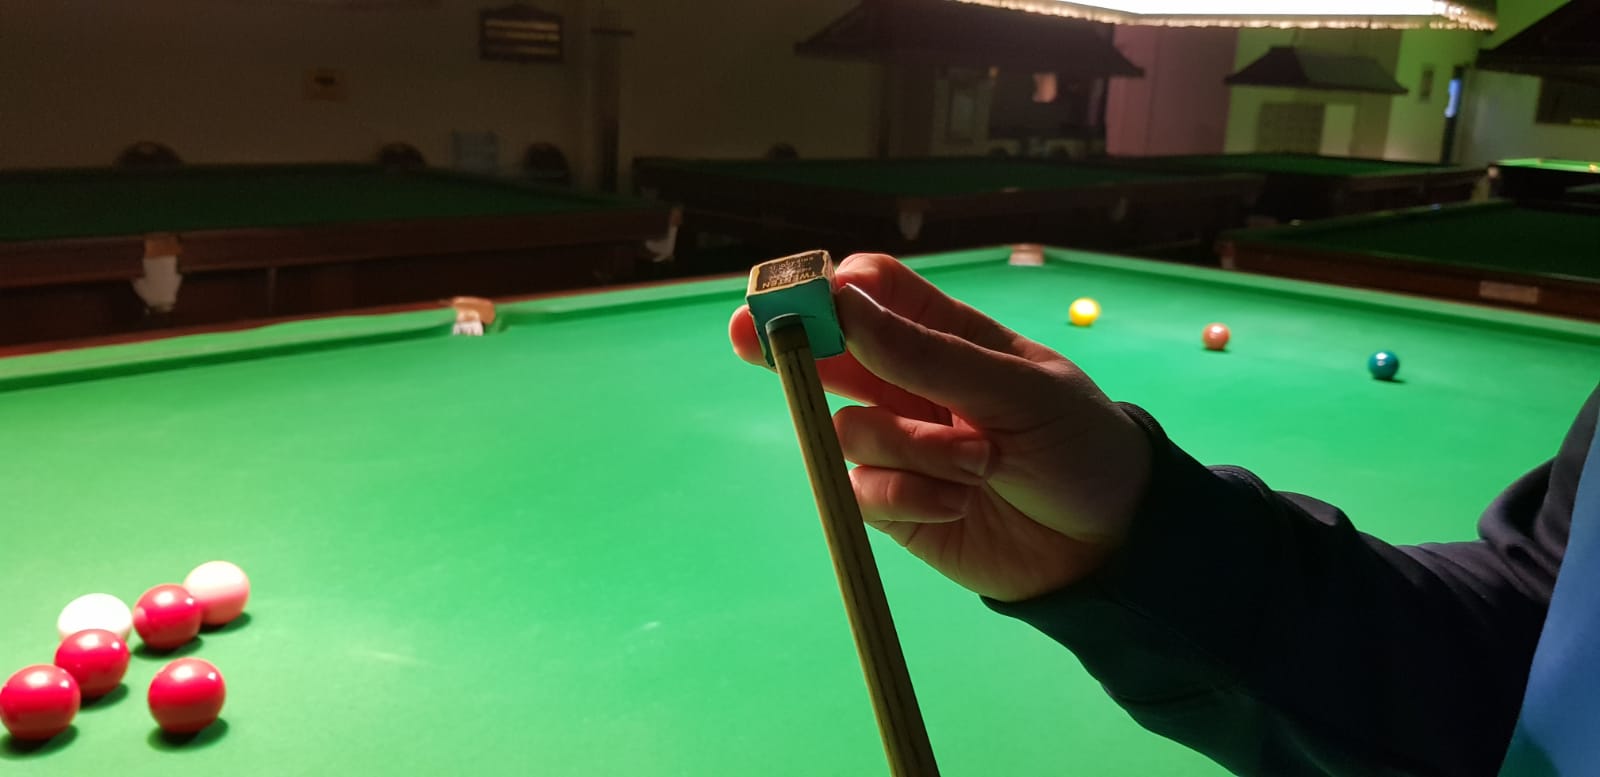 Snooker and Covid-19 — When Can I Play Snooker Again?